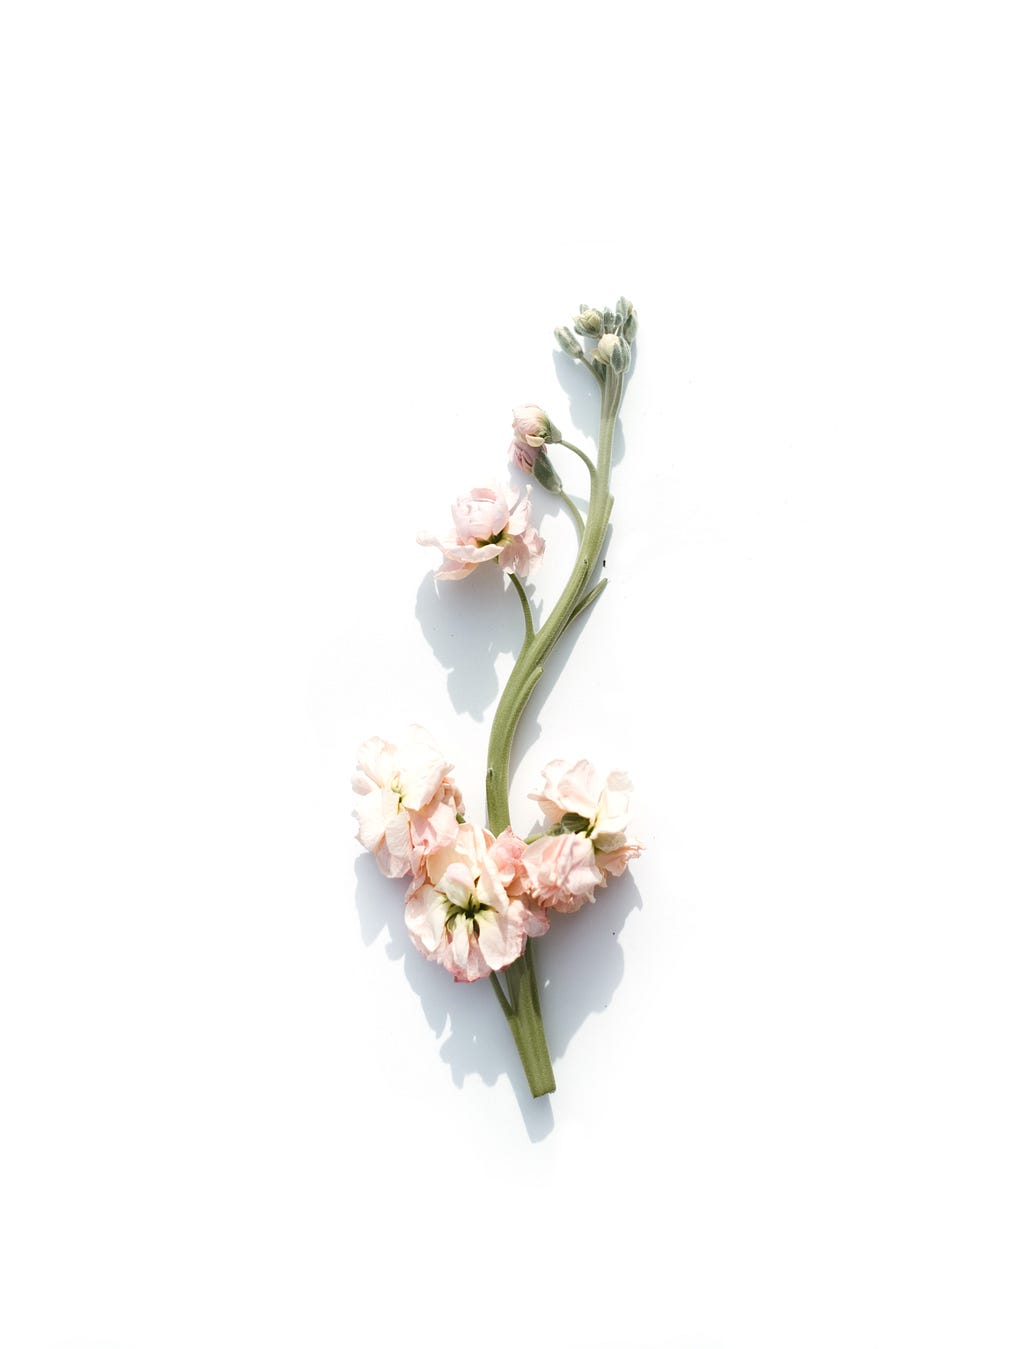 Pink flowers blooming on a green stalk